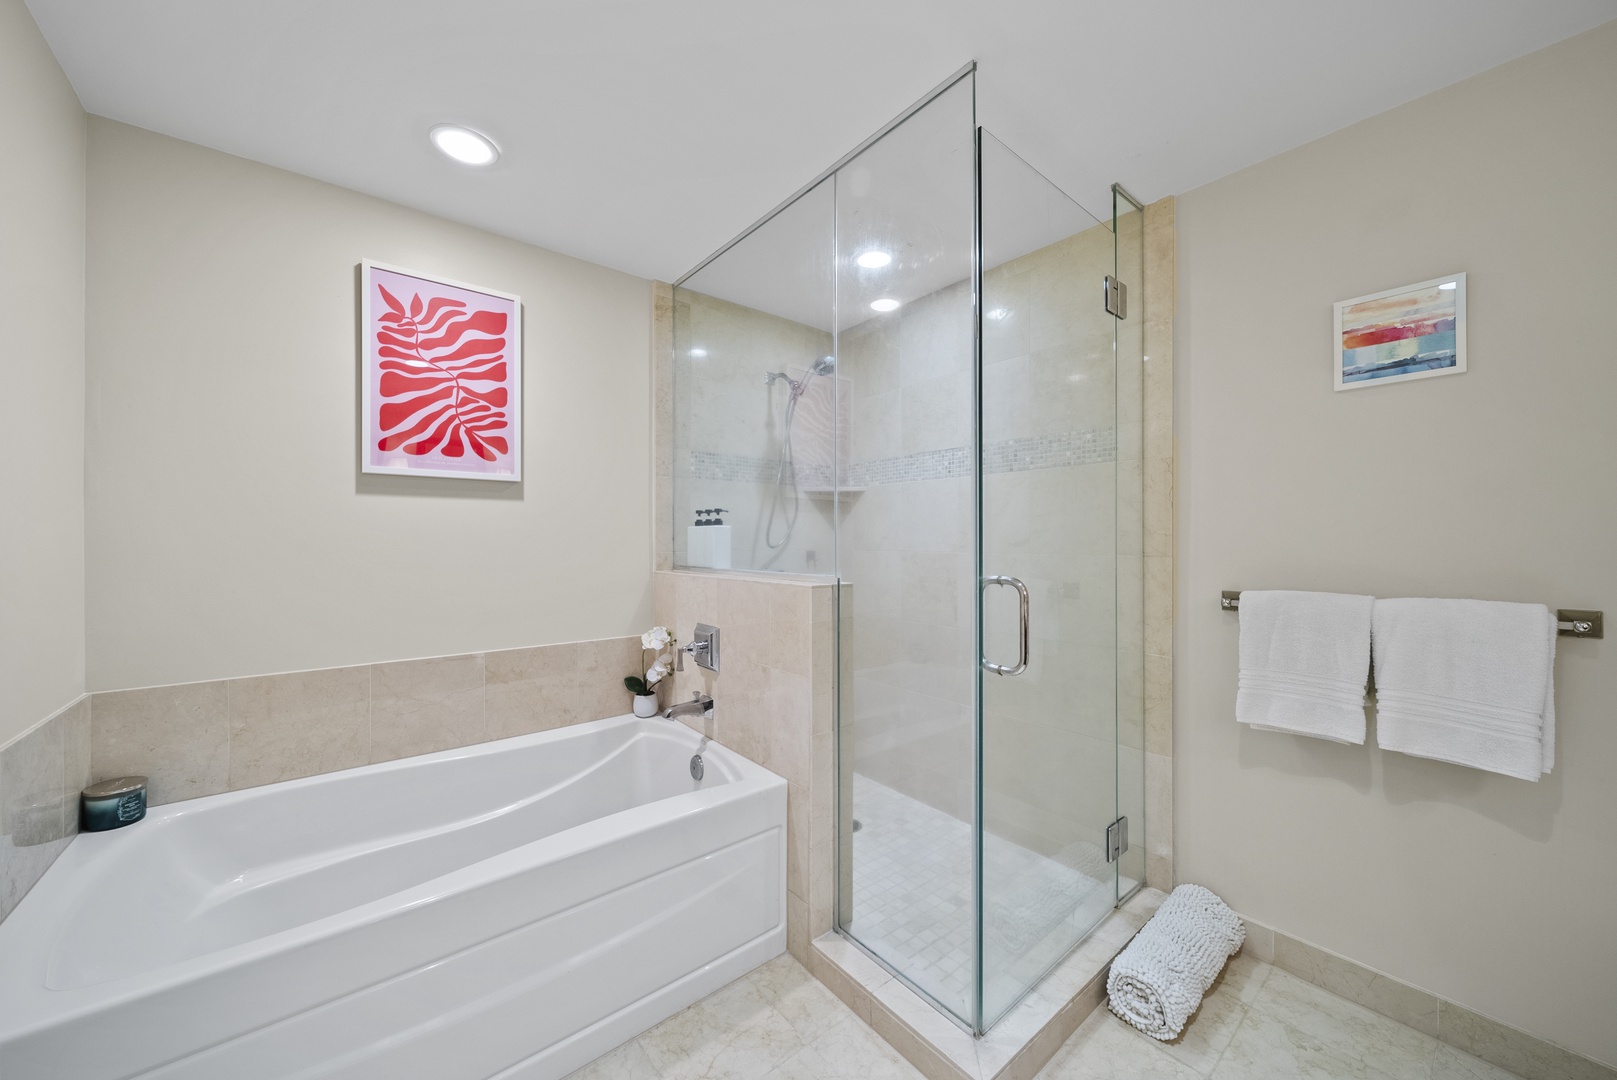 Honolulu Vacation Rentals, Watermark Waikiki Unit 901 - The ensuite bathroom with a shower/tub combo and a separate walk-in shower.